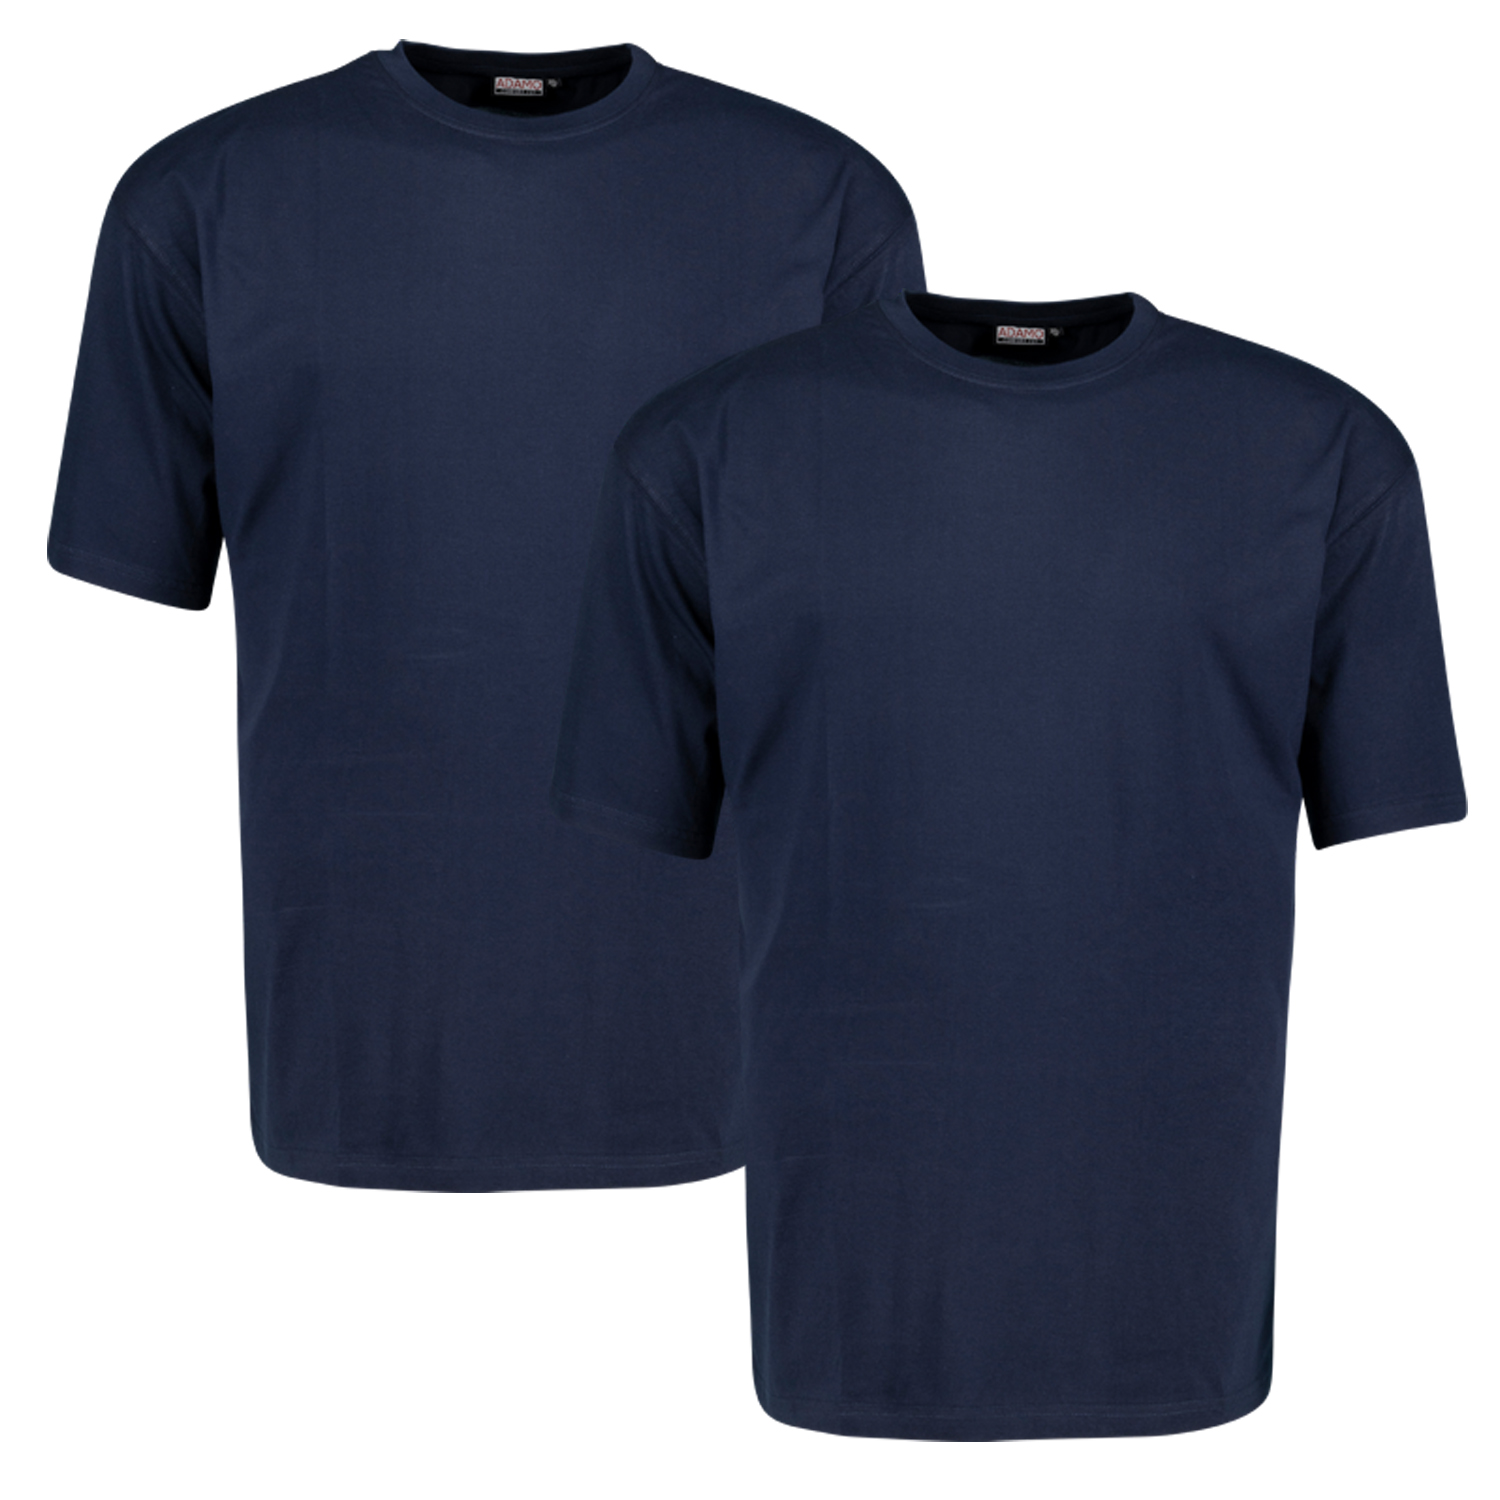 Double pack MARLON COMFORT FIT navy t-shirt by ADAMO up to extra large size 18XL